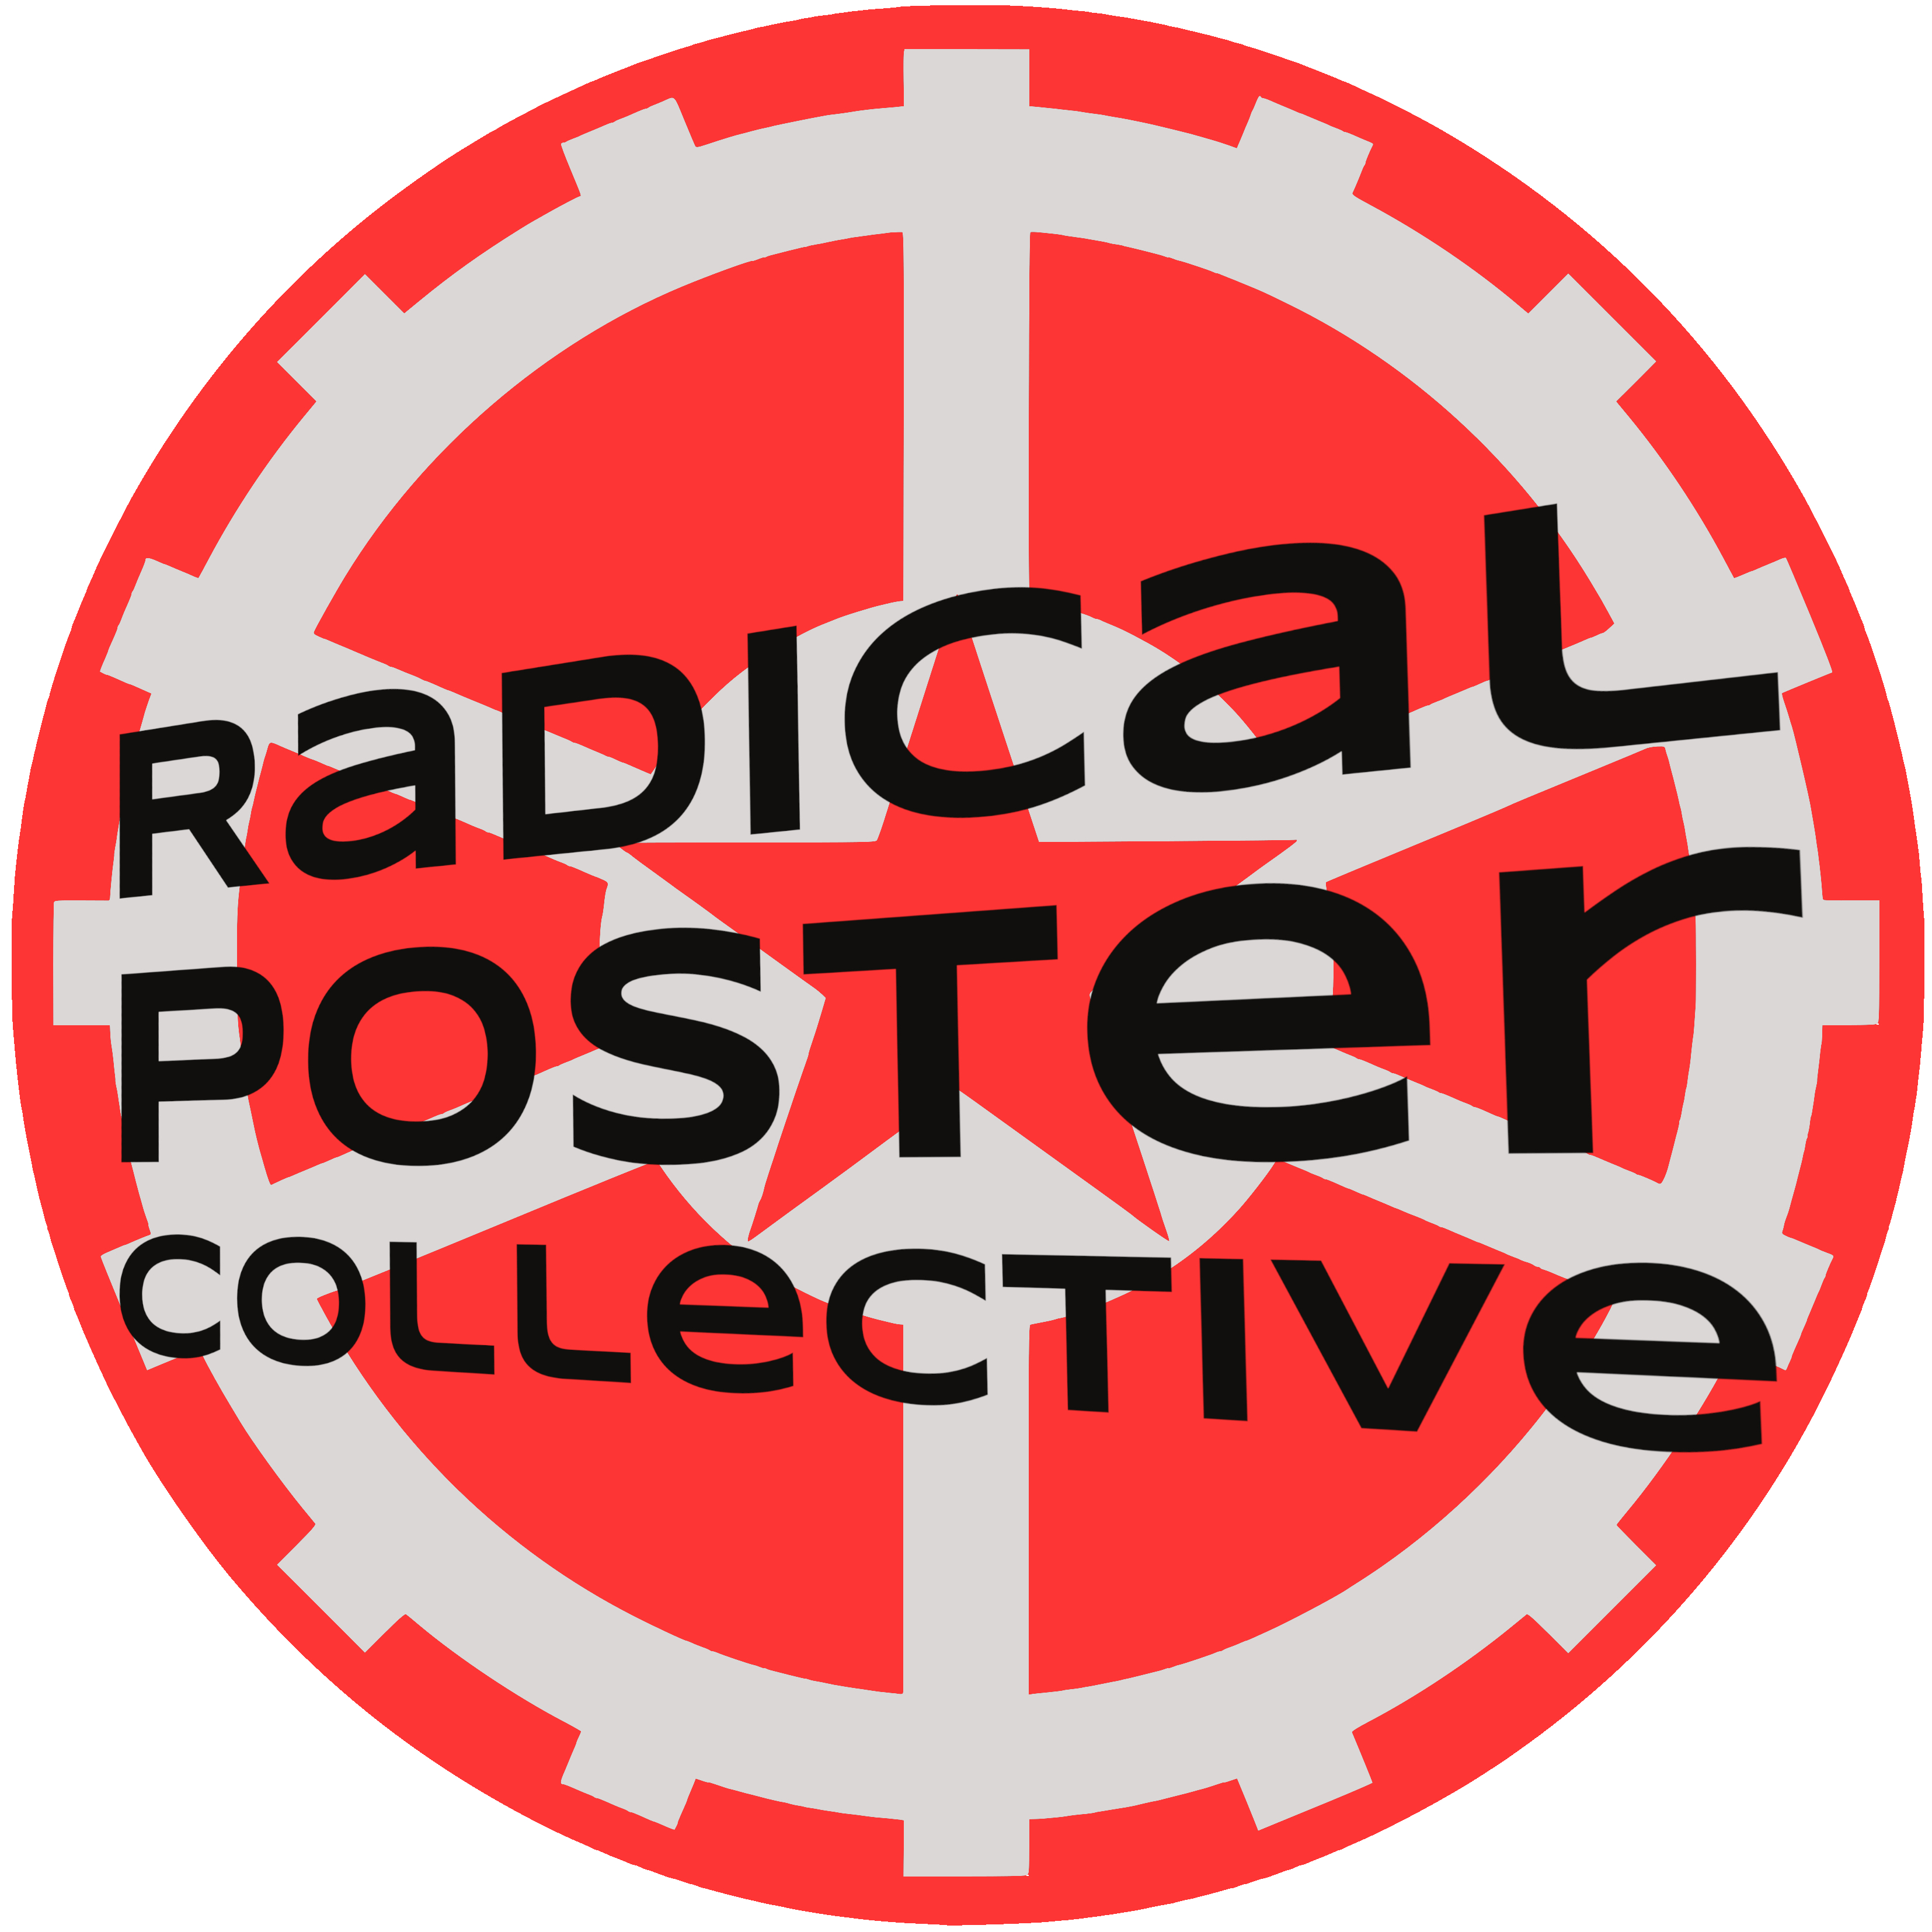 Radical Poster Collective